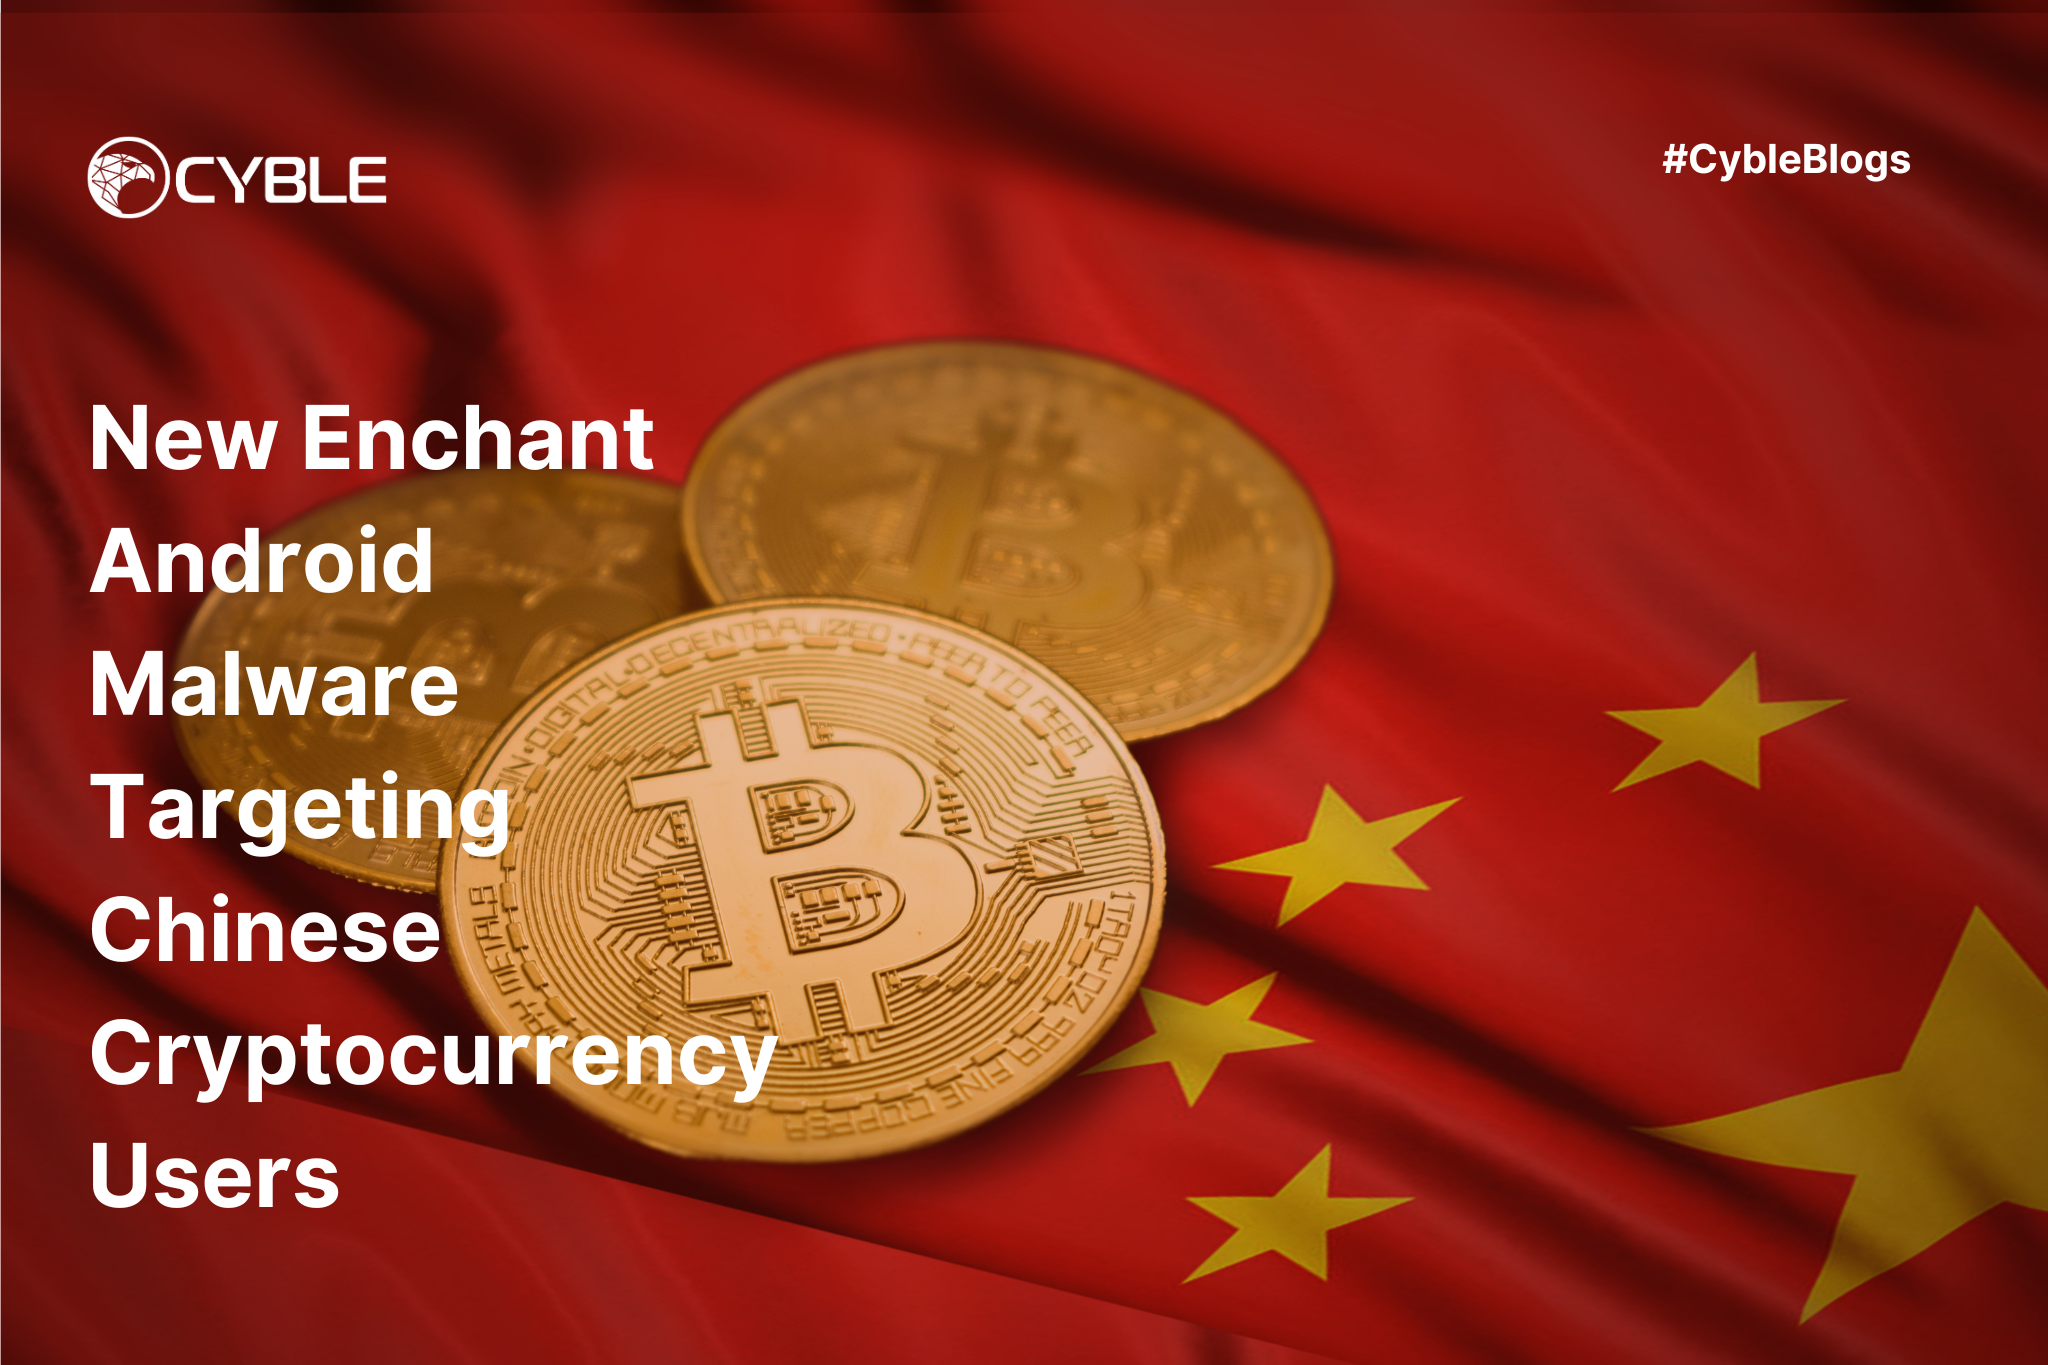 New Enchant Android Malware Targeting Chinese Cryptocurrency Users â€” Cyble